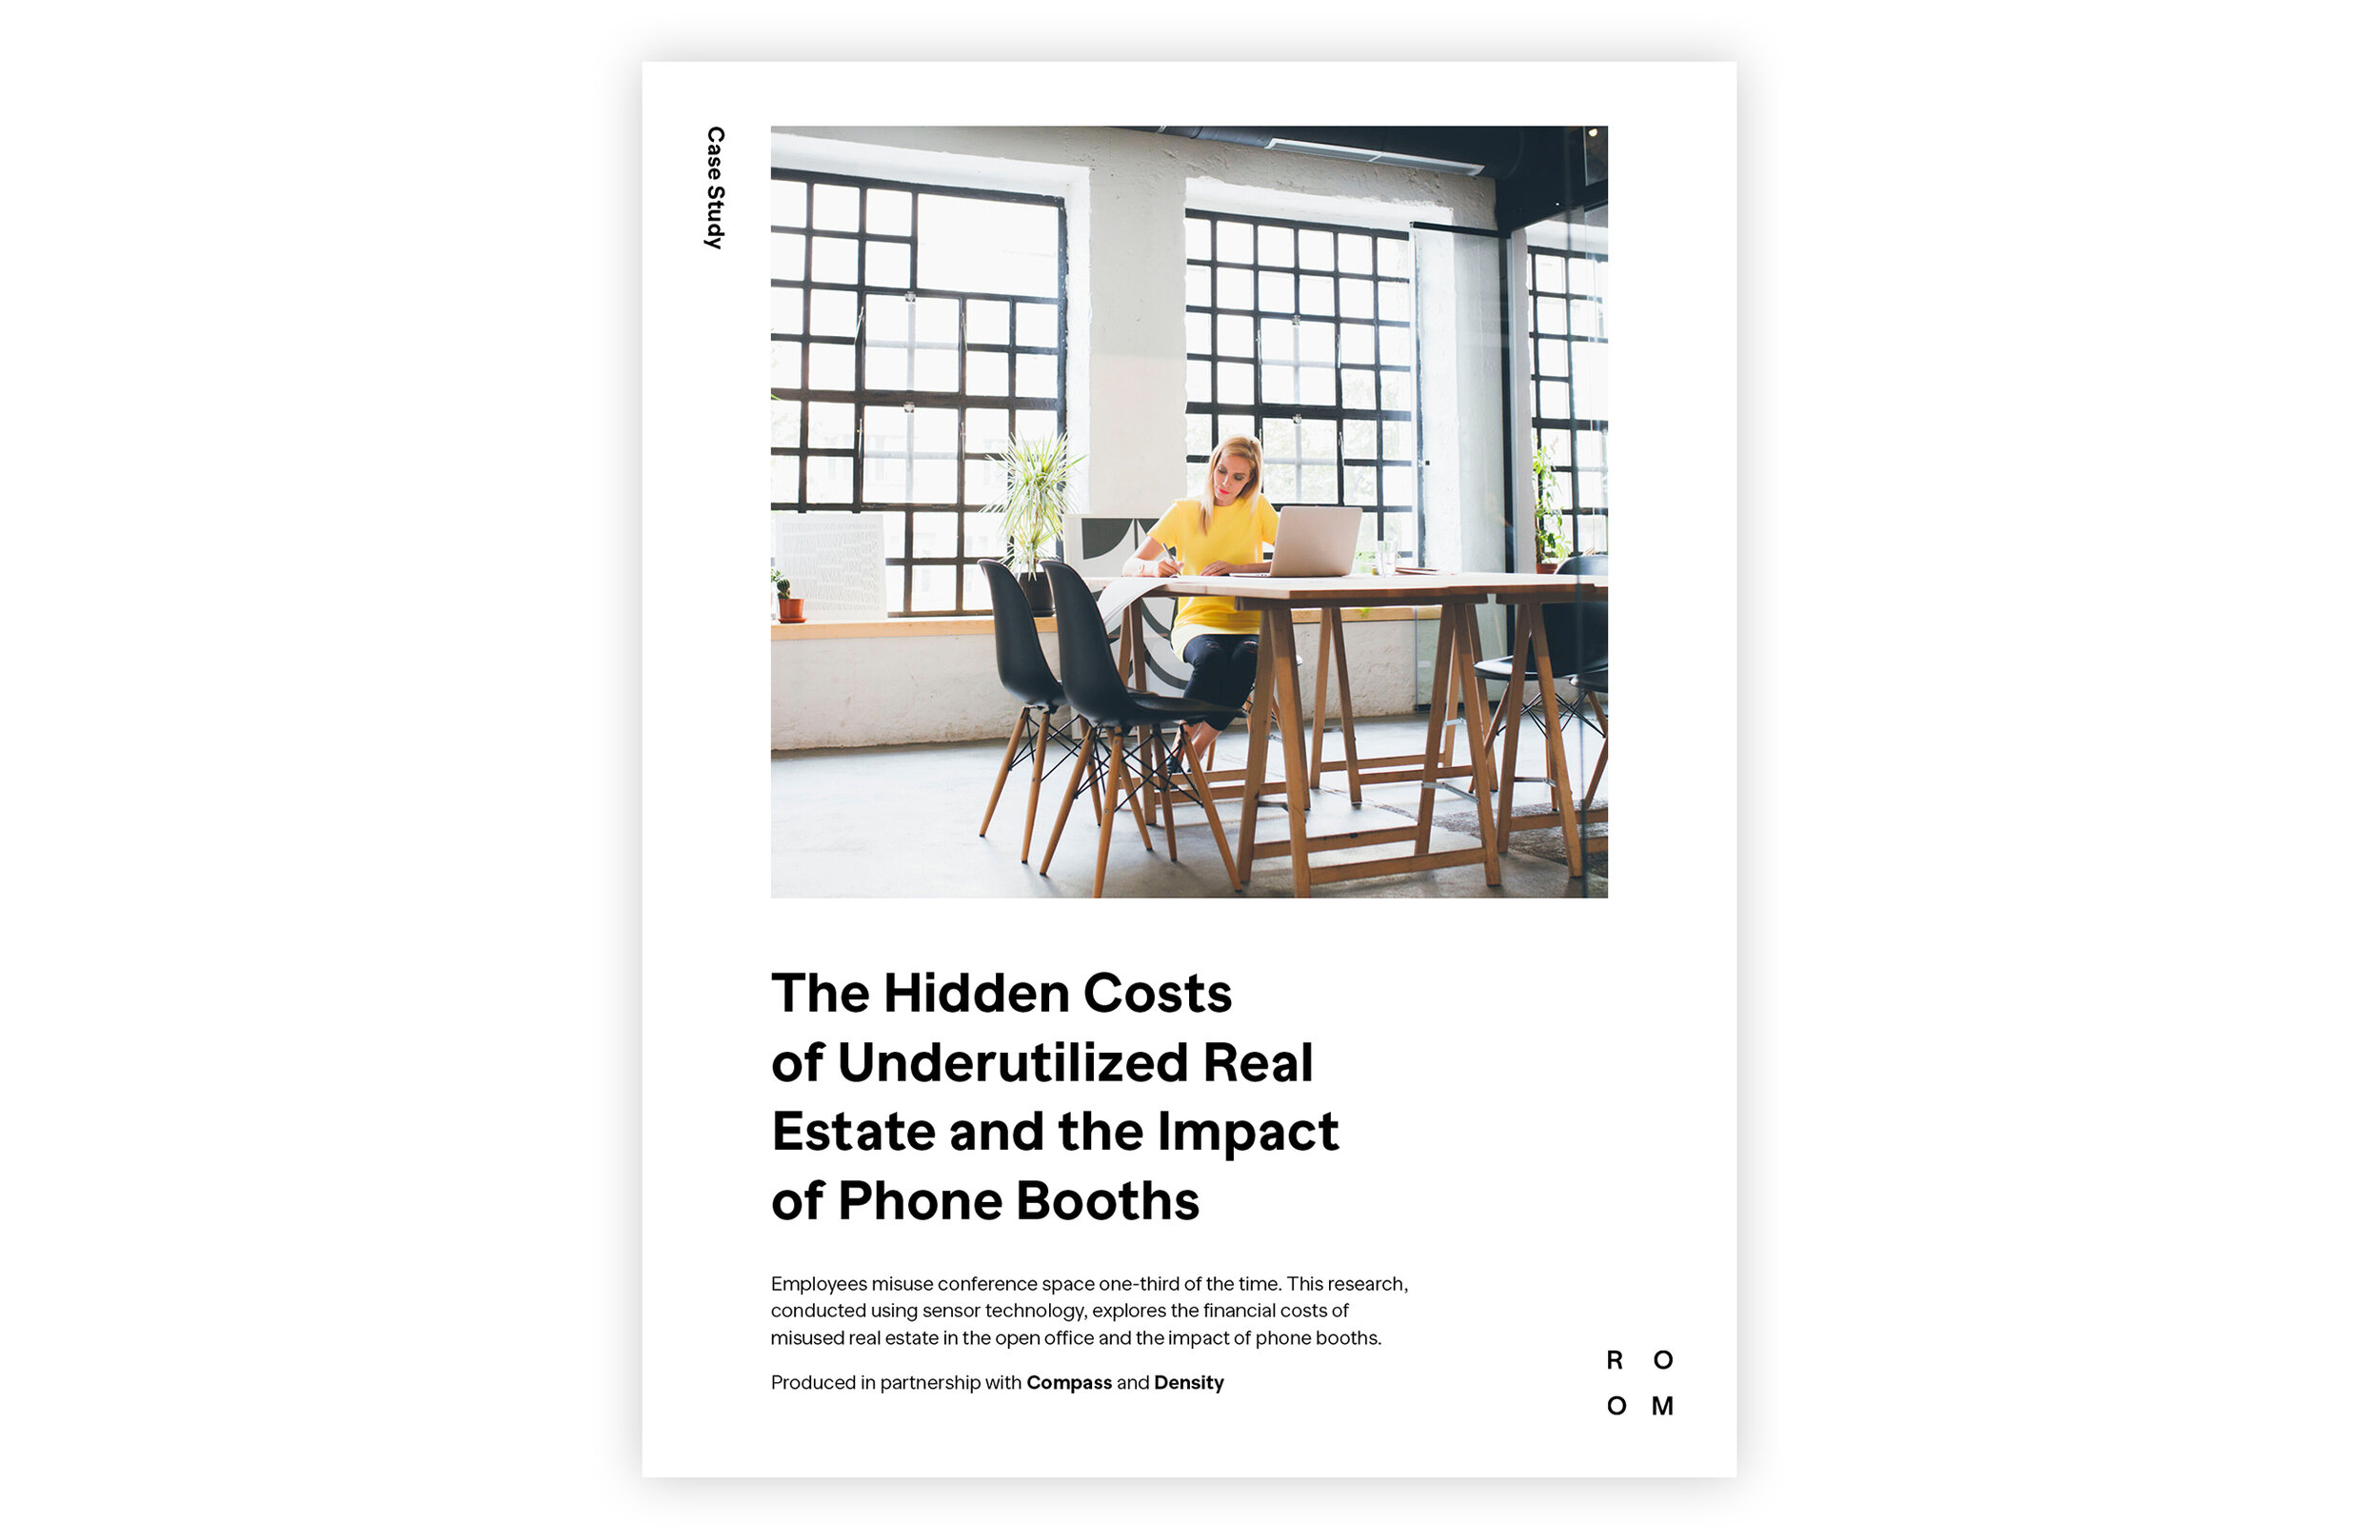 ROOM: The Hidden Costs of Underutilized Real Estate and the Impact of Phone Booths